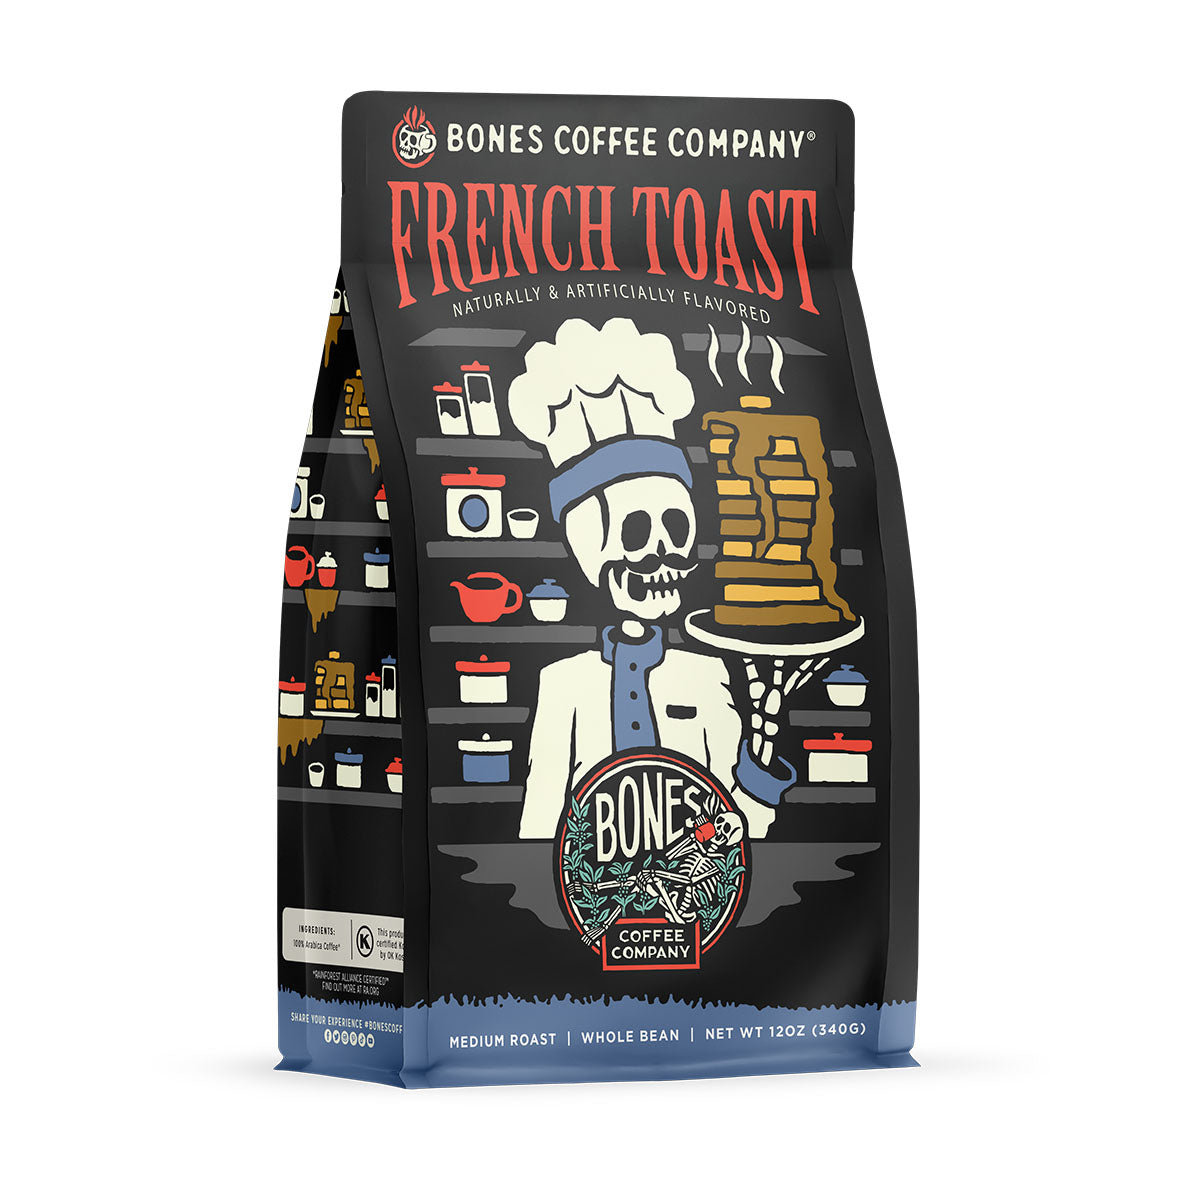 The front of a 12 ounce bag of Bones Coffee Company French Toast coffee. Its flavor is french toast, and it has a skeleton wearing a chef’s coat and hat holding up a plate of fresh french toast on the art.